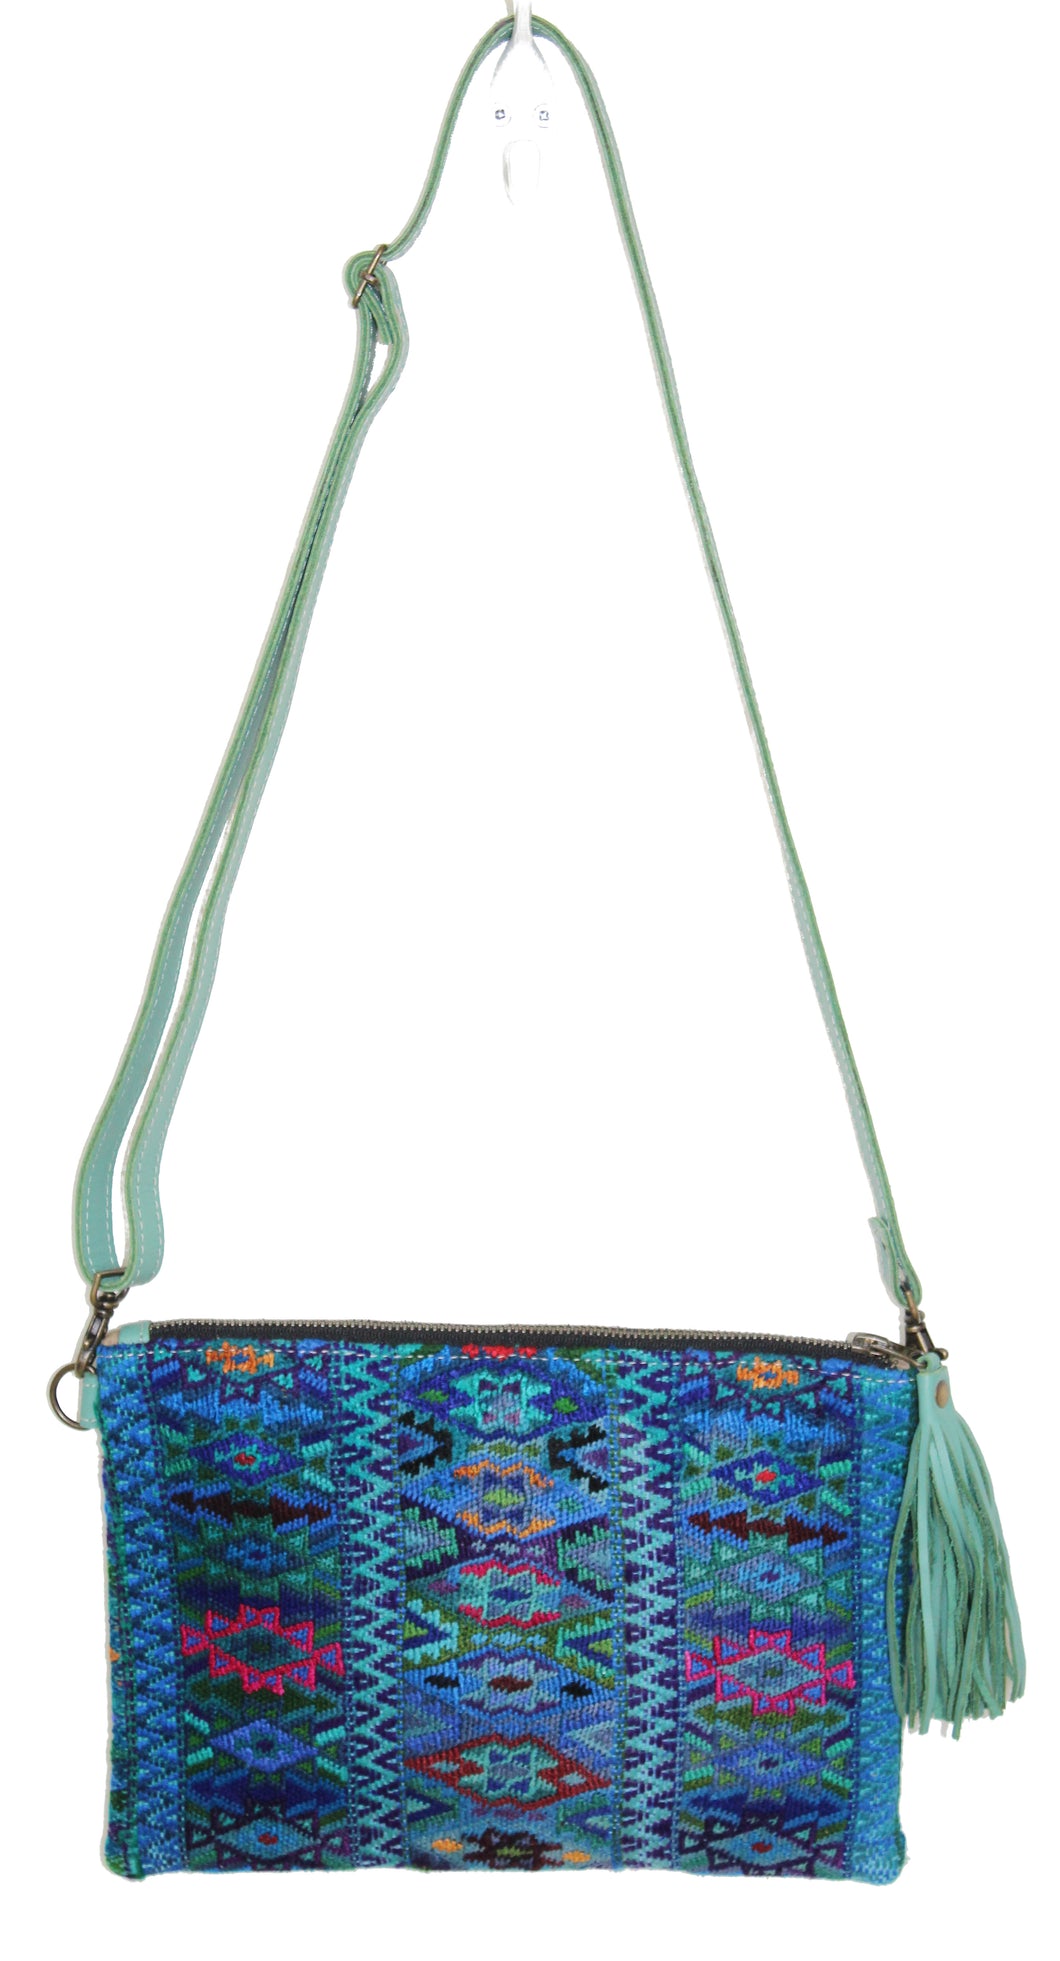 MoonLake Designs Lola small bag in teal leather 